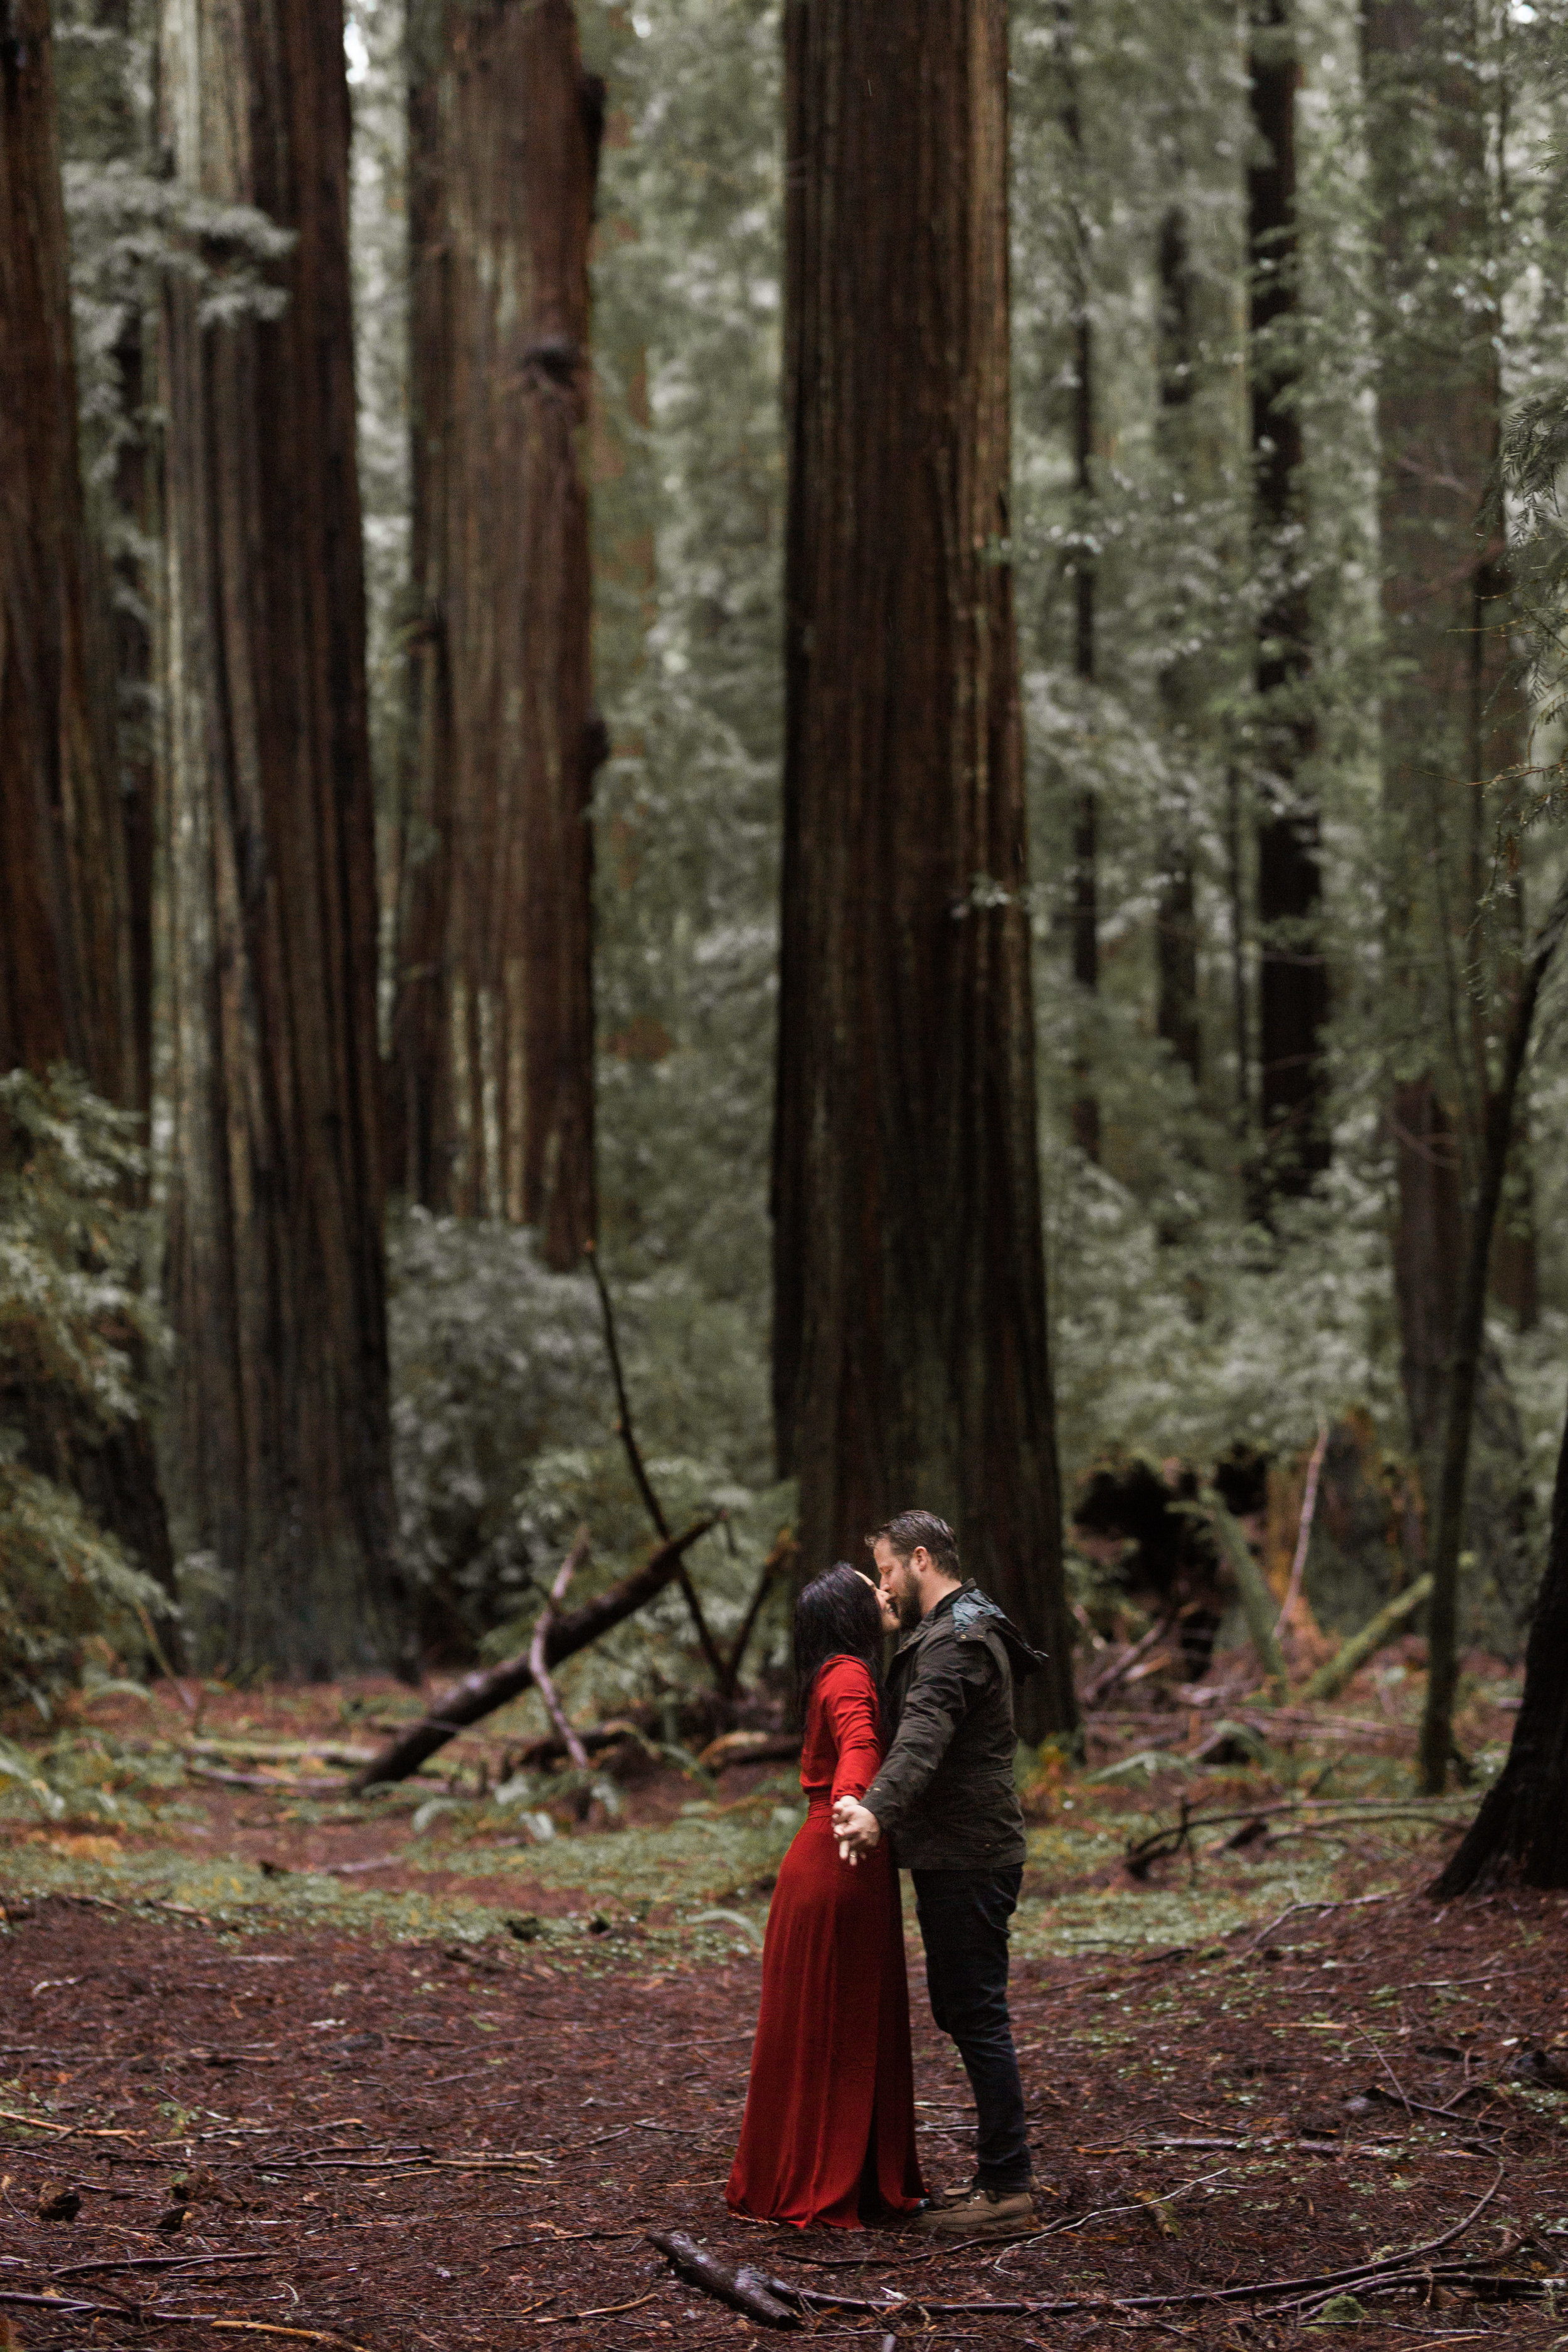 nicole-daacke-photography-redwoods-national-park-forest-rainy-foggy-adventure-engagement-session-humboldt-county-old-growth-redwood-tree-elopement-intimate-wedding-photographer-38.jpg